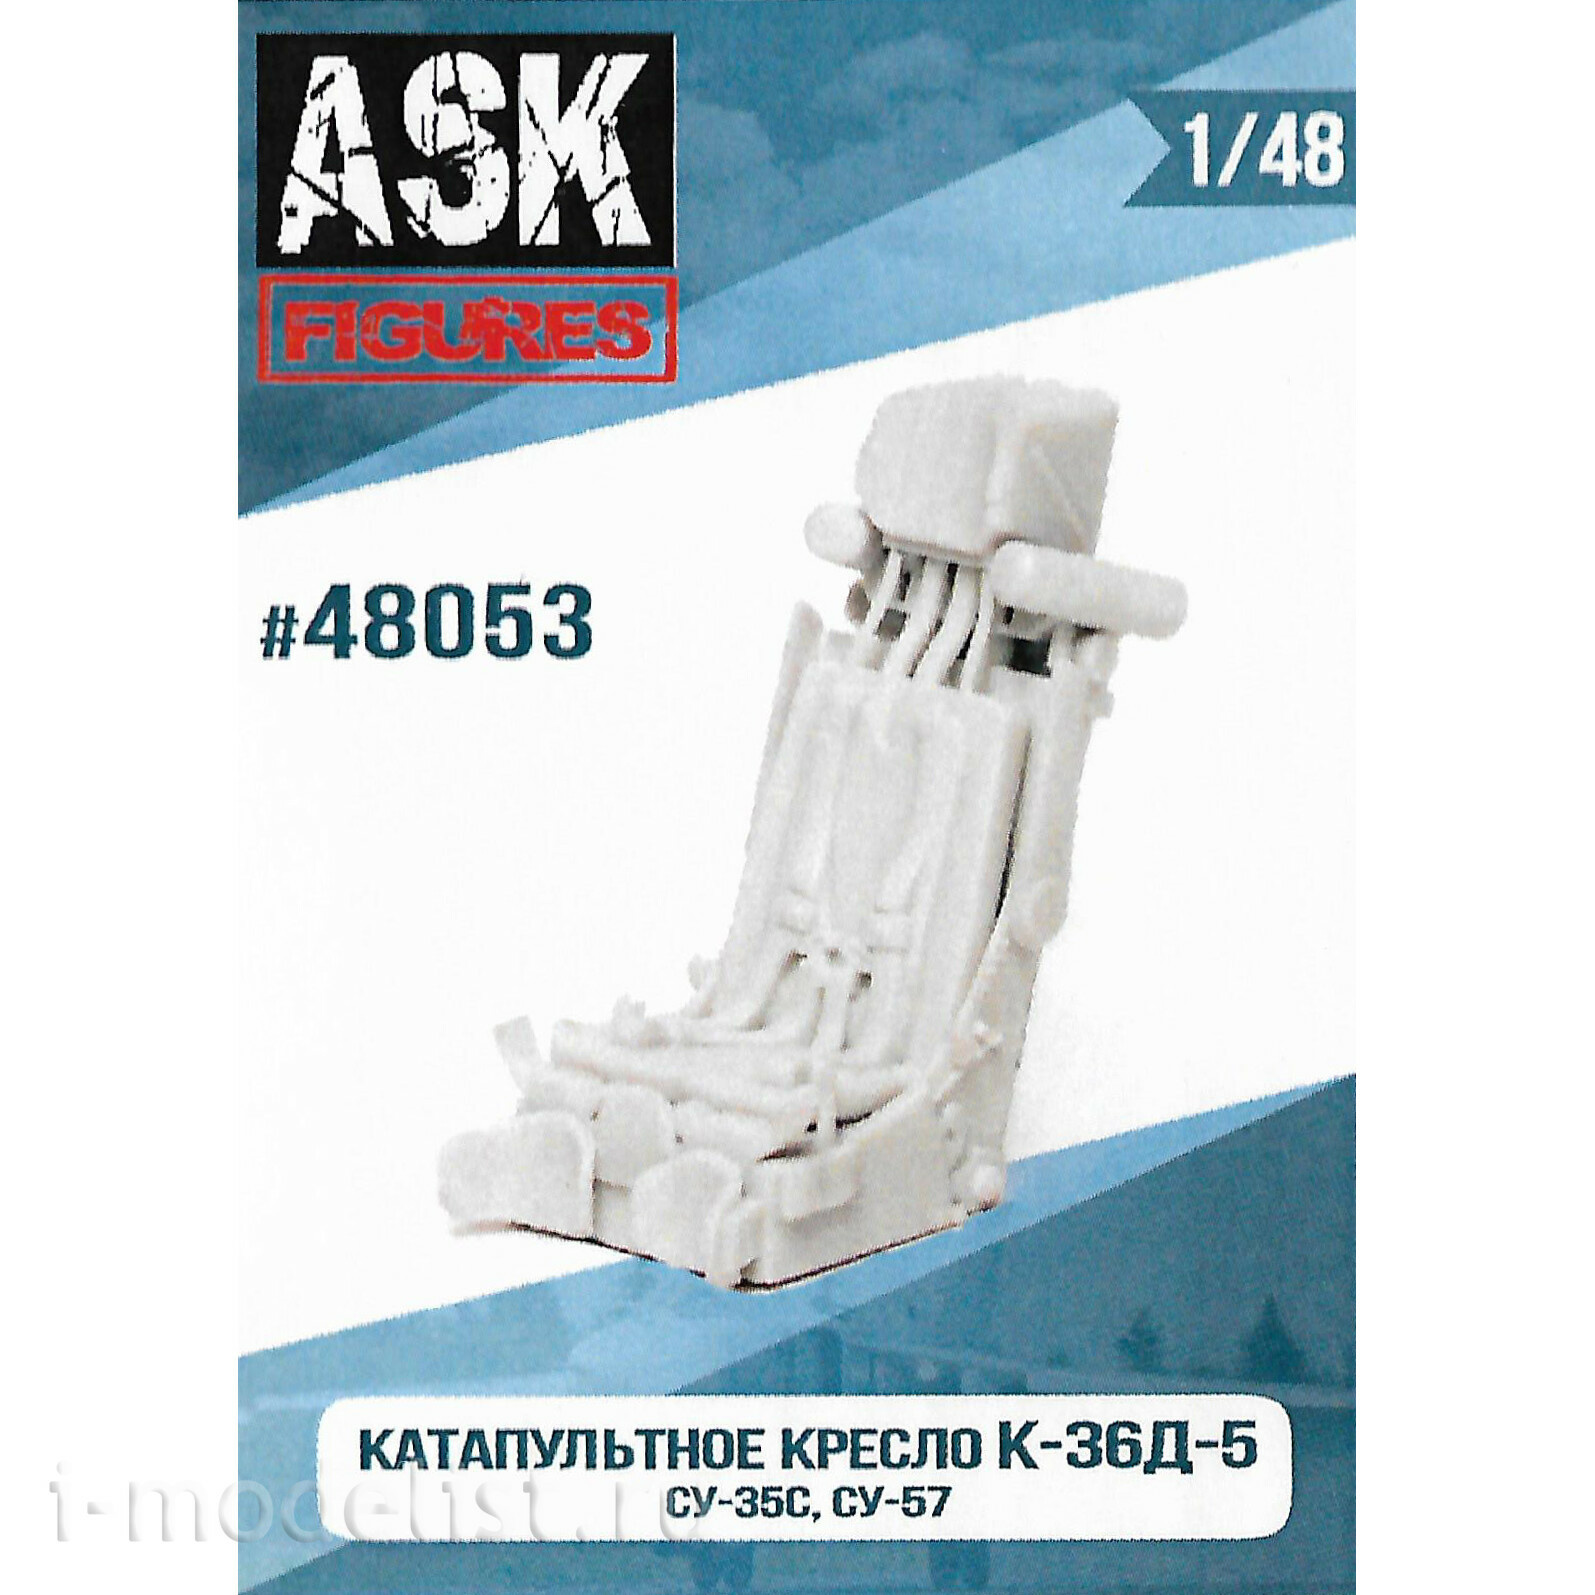 4824P Zvezda 1/48 Gift Set: Russian Su-57 Fighter + ASK48053 Ejection Seat K-36D-5 All Scale Kits (ASK)